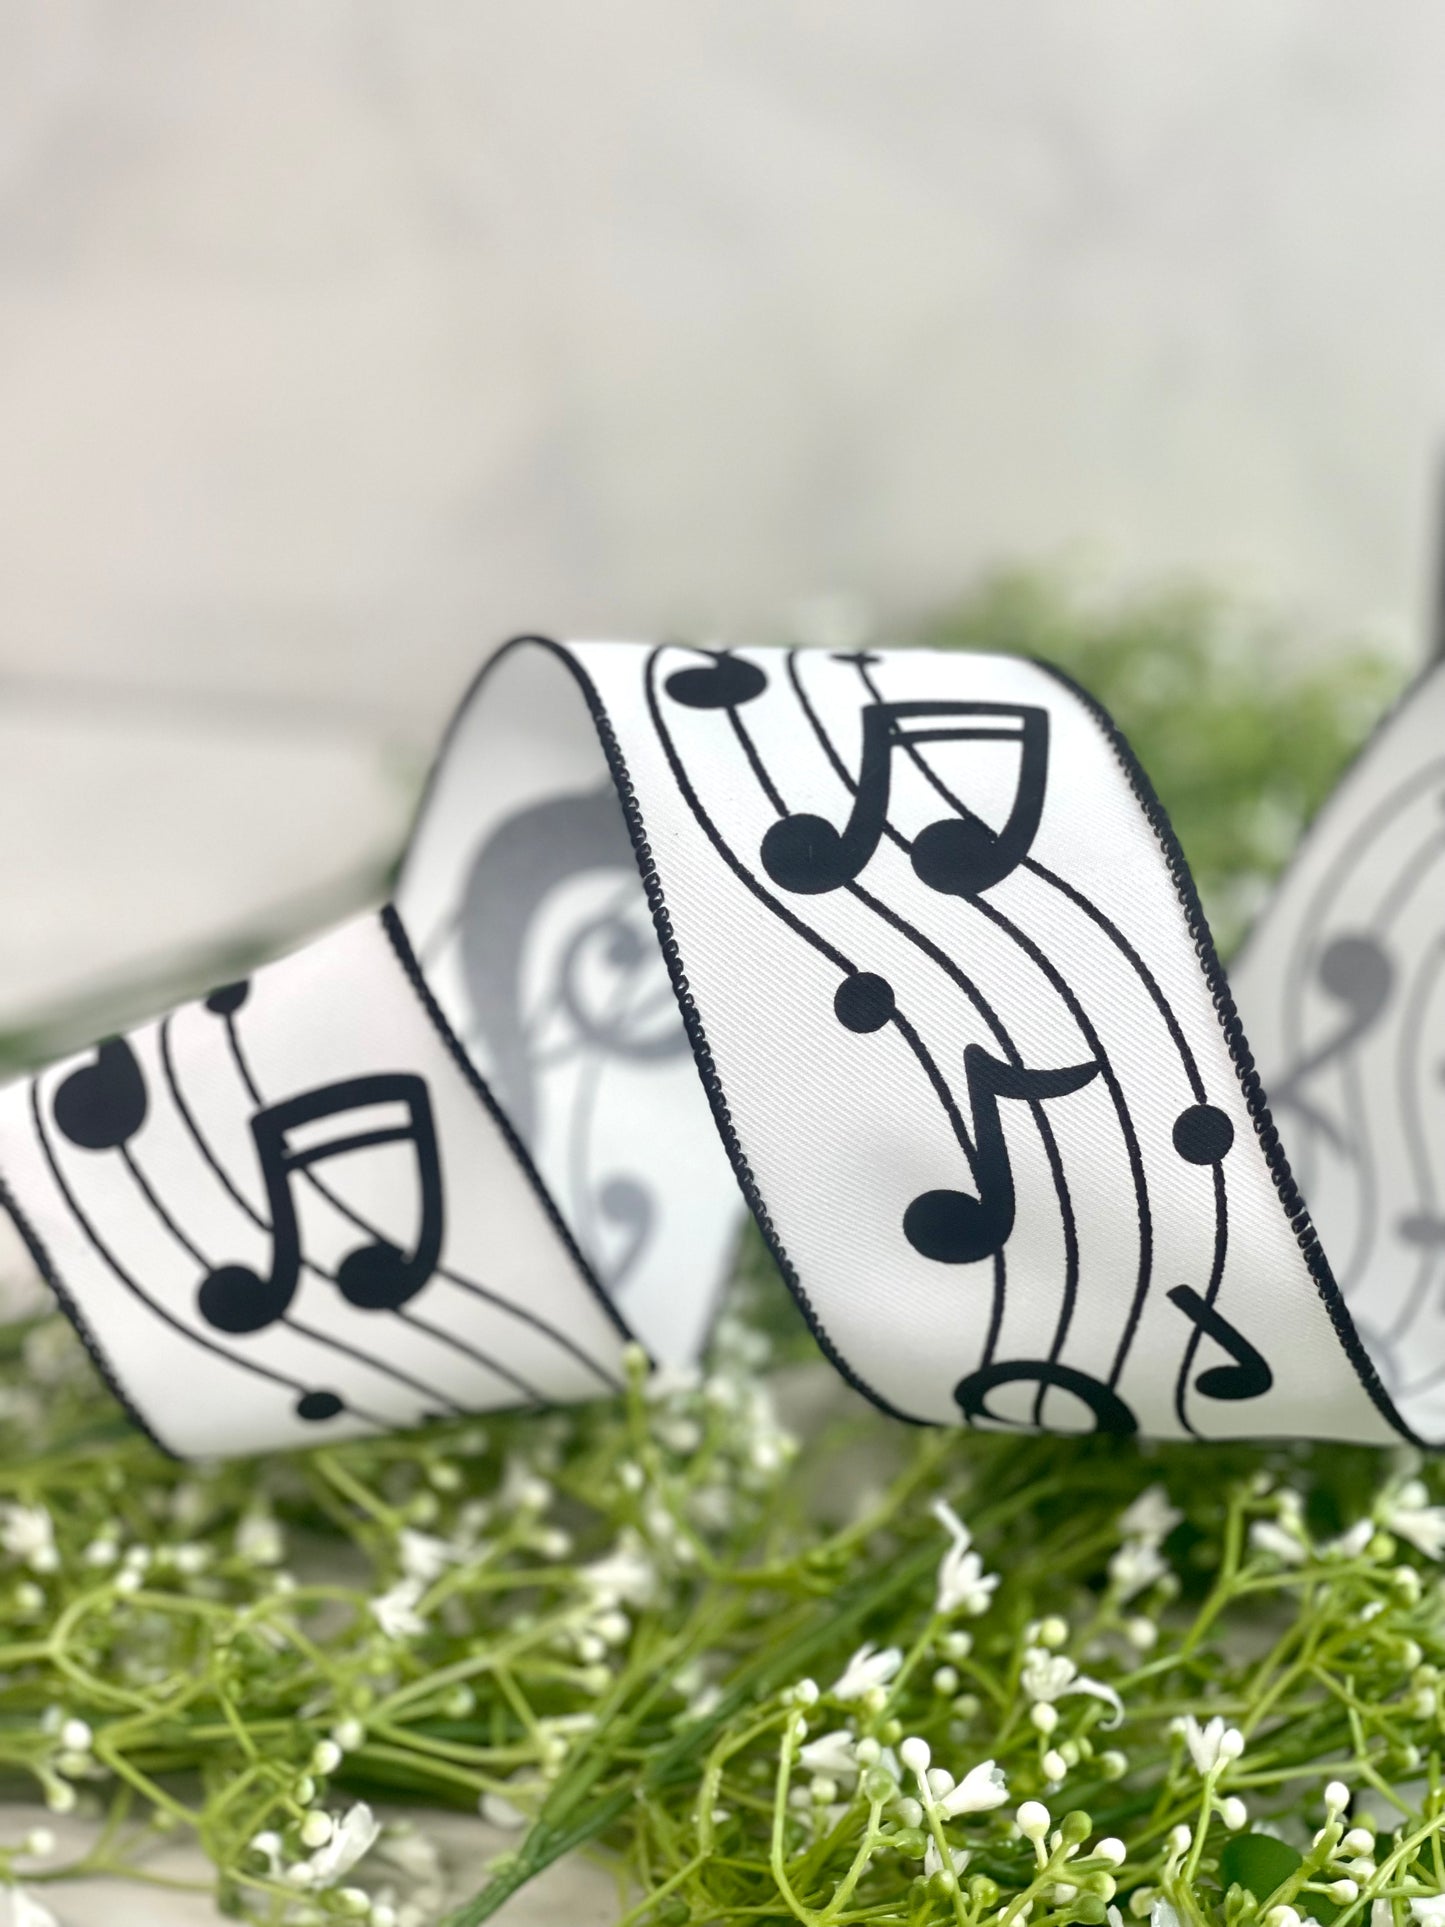 2.5 Inch By 10 Yard White And Black Bold Music Notes Ribbon